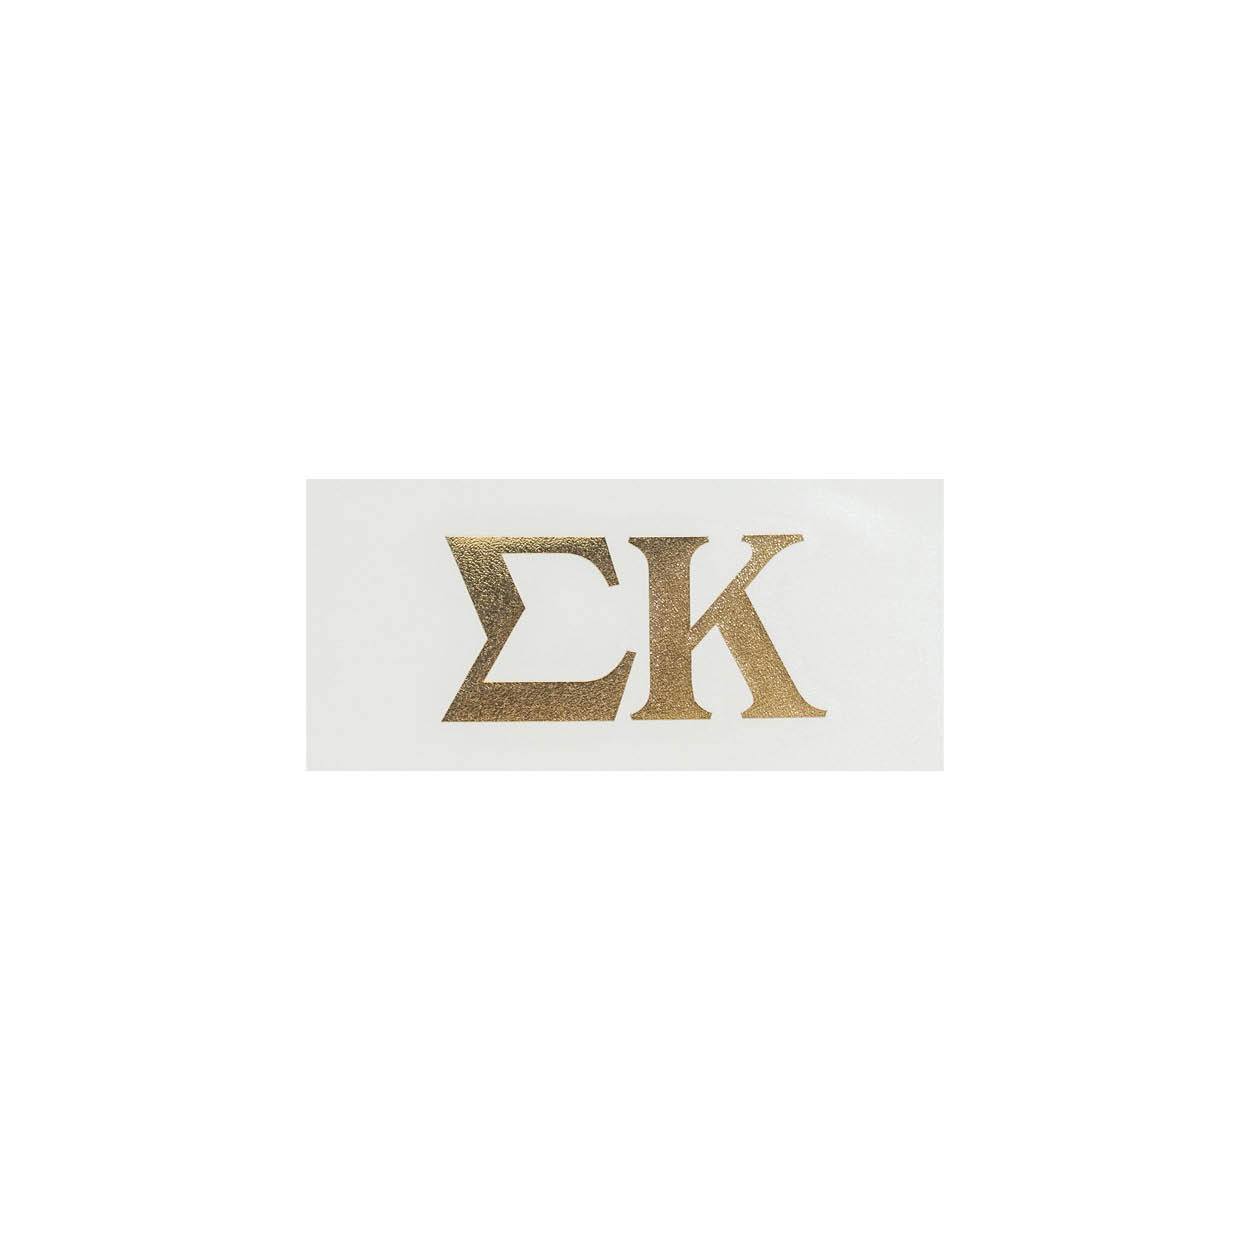 Gold Foil Decal Greek in Sigma Kappa at Wrapsody